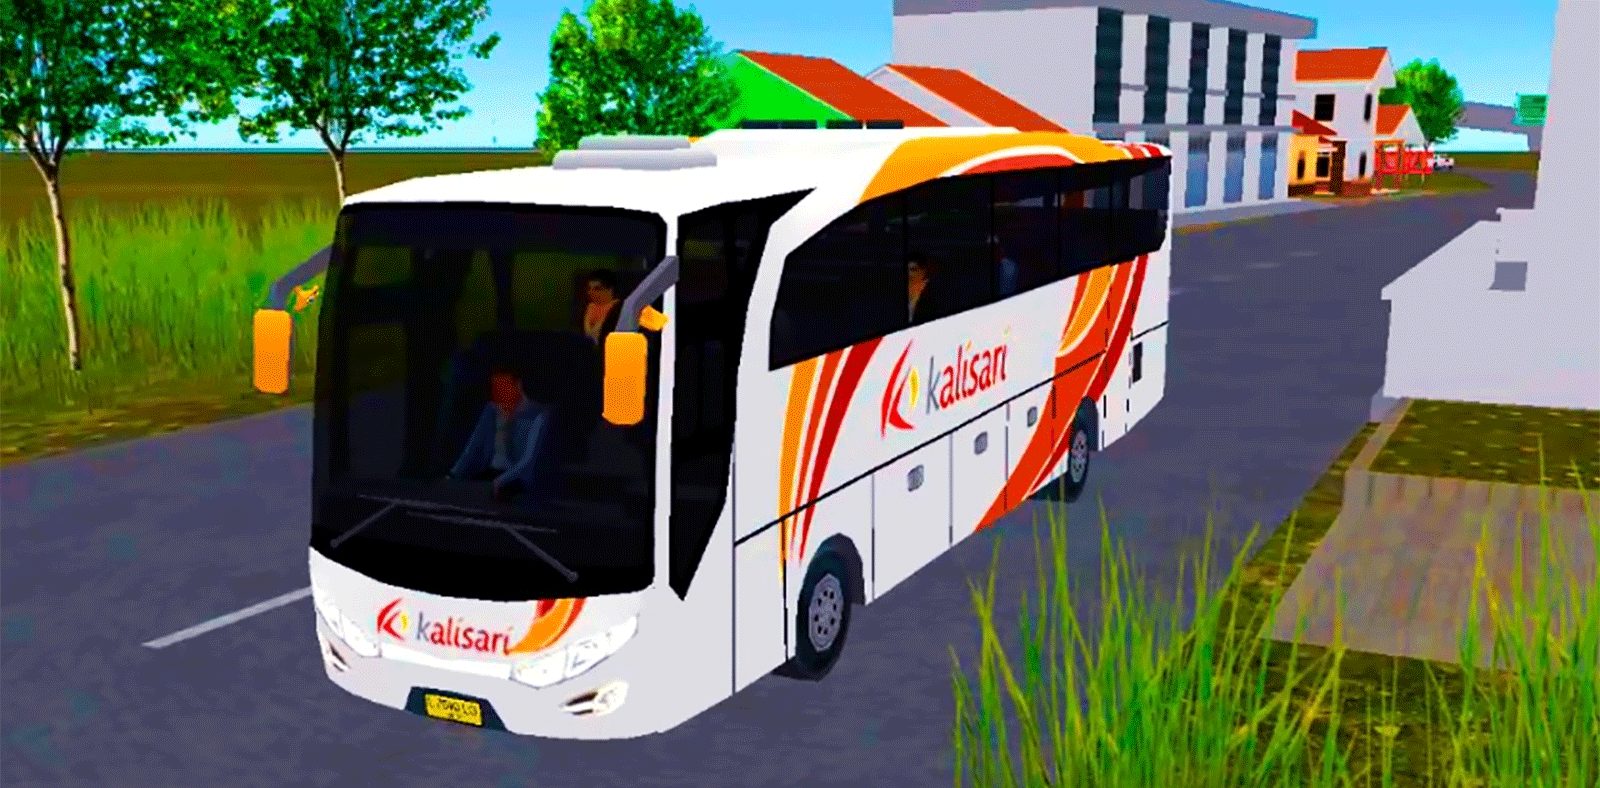 Bus Simulator Indonesia Revdl.com / New Phoenix Bus Mod For Bus Simulator Indonesia Download Now With Link Android Games Youtube / Bus simulator indonesia mod apk 3 5 download unlimited money bus simulator indonesia (aka bussid) will let you experience what it likes being a bus driver in indonesia in a fun and authentic way.